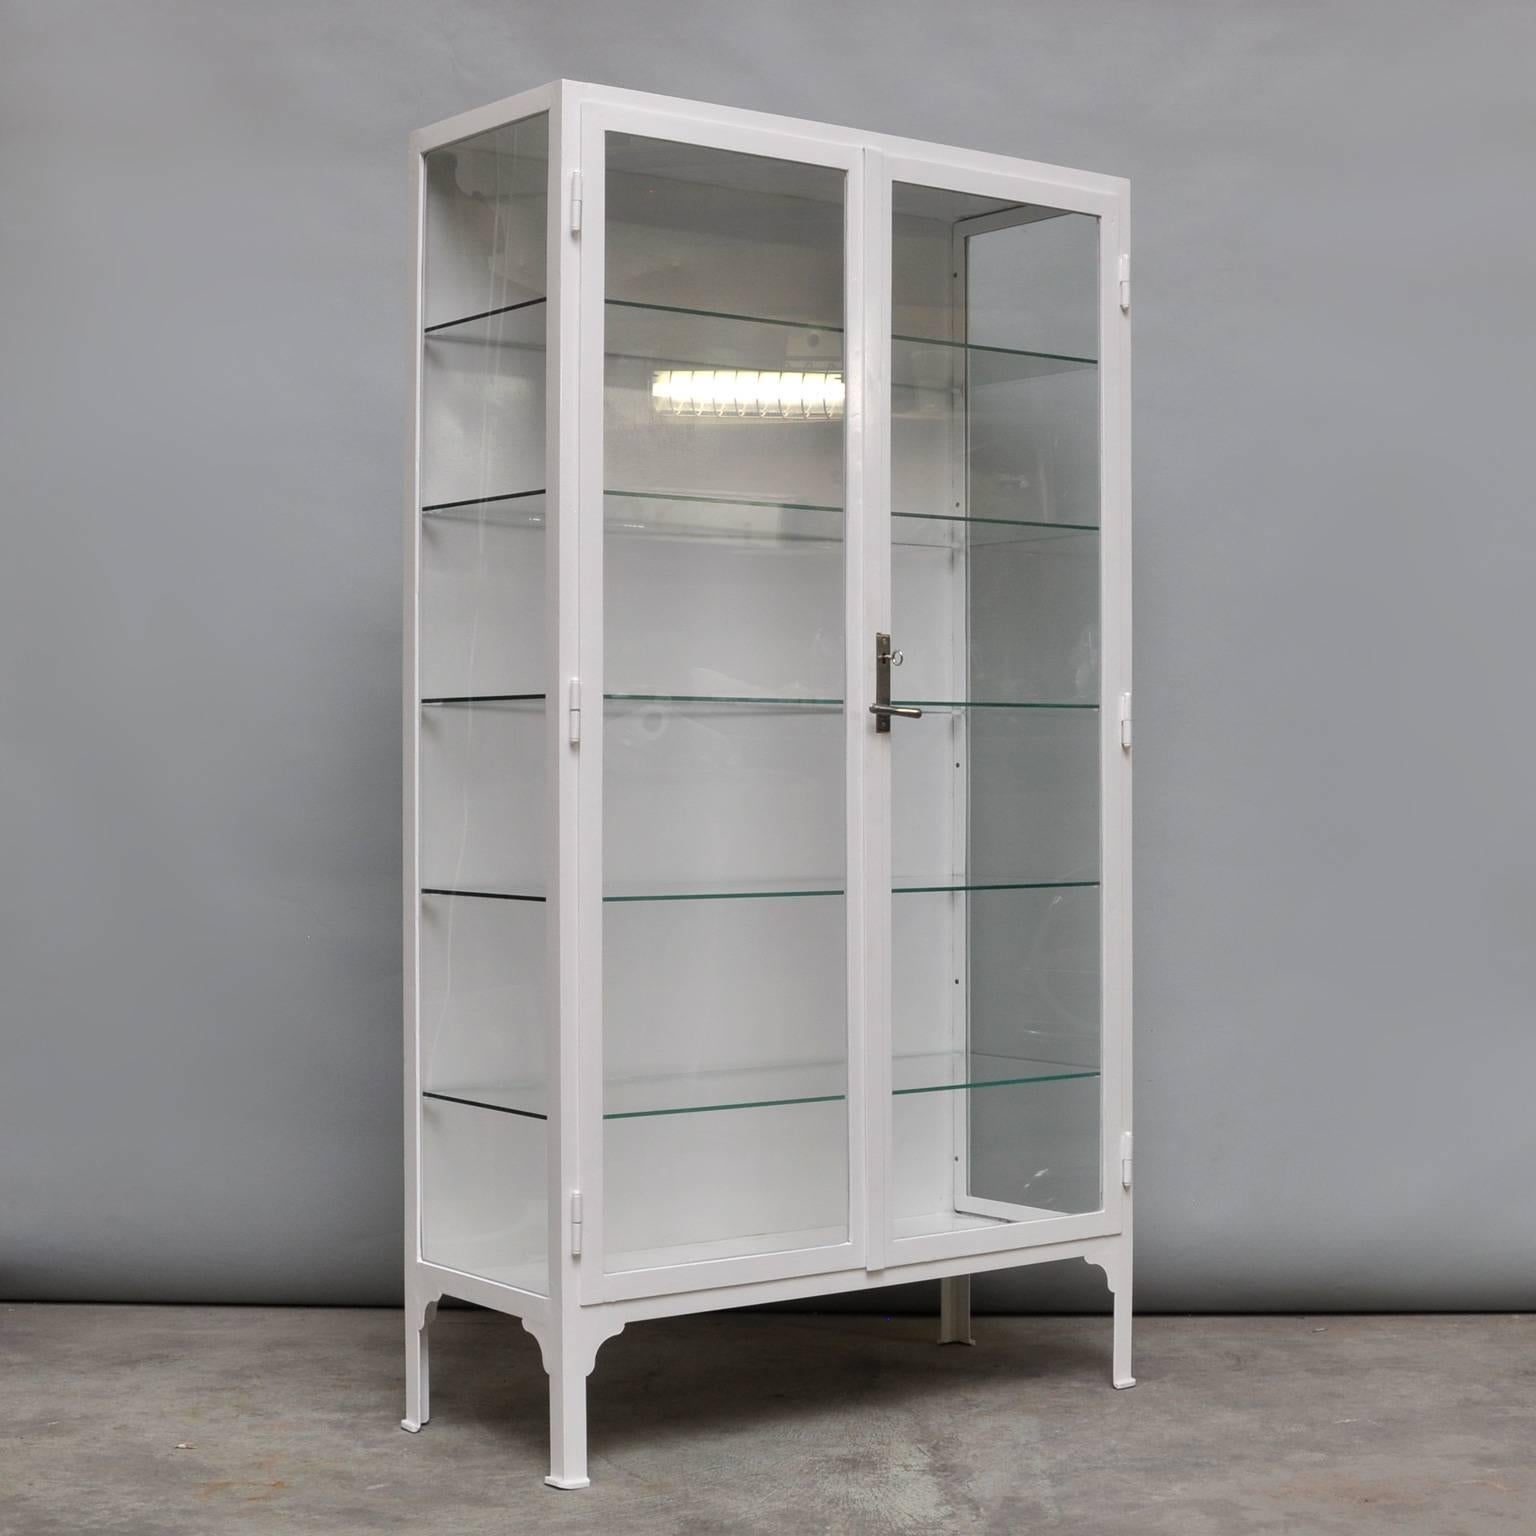 This medicine cabinet was produced in the 1940s in Hungary. The cabinet is made from thick iron and glass. It features five (new) glass shelves. In an excellent condition. The cabinet has been restored (very small crack in glass, see photo).